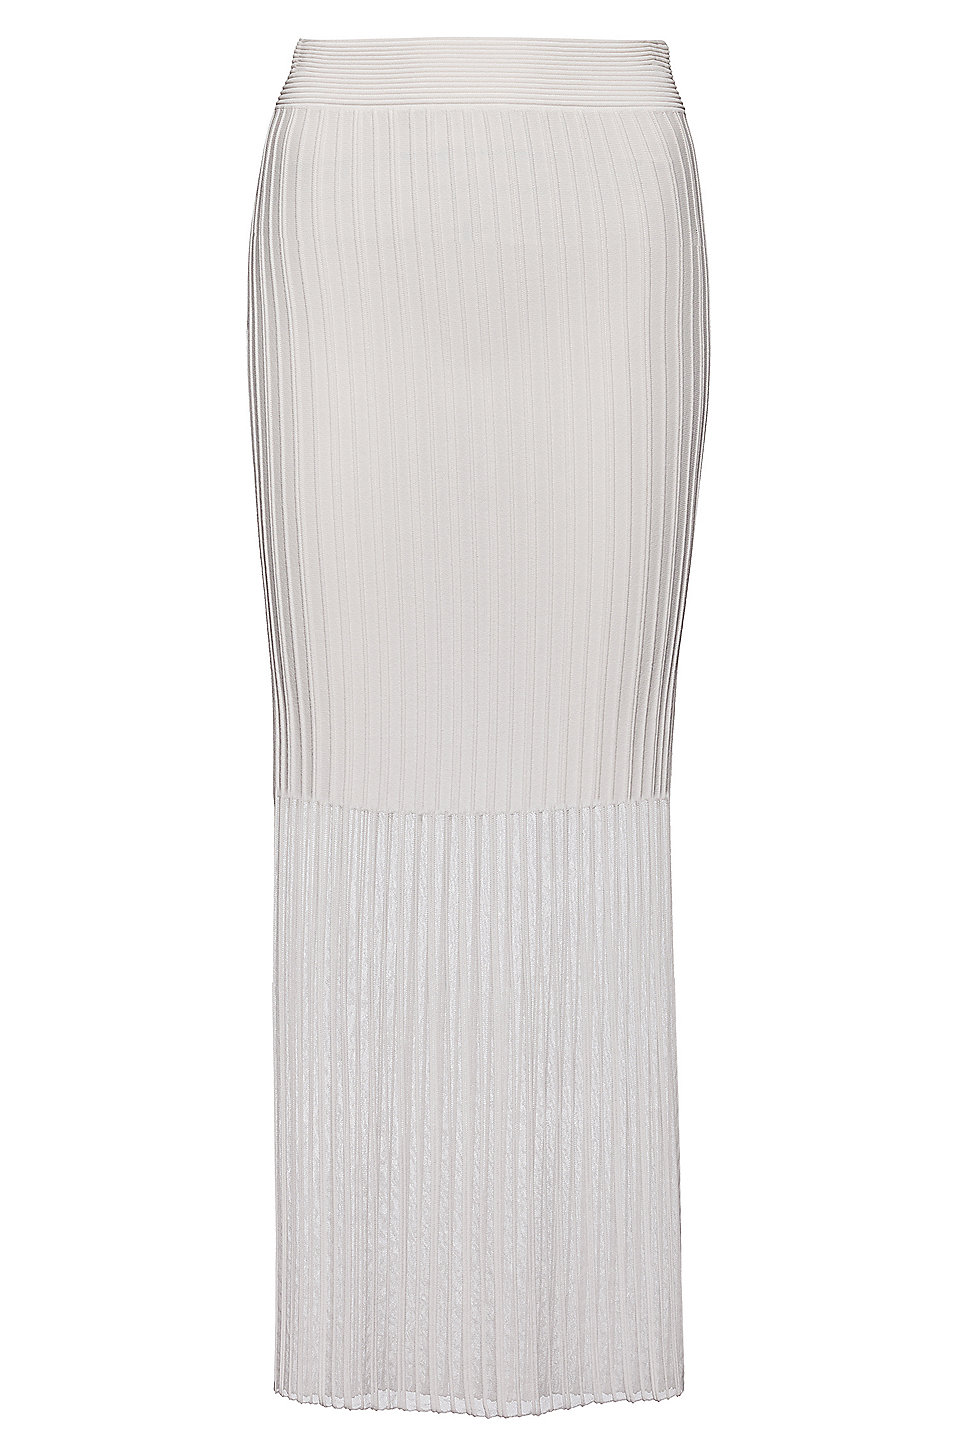 Hugo Boss - Knitted skirt with transparent section and ribbed structure